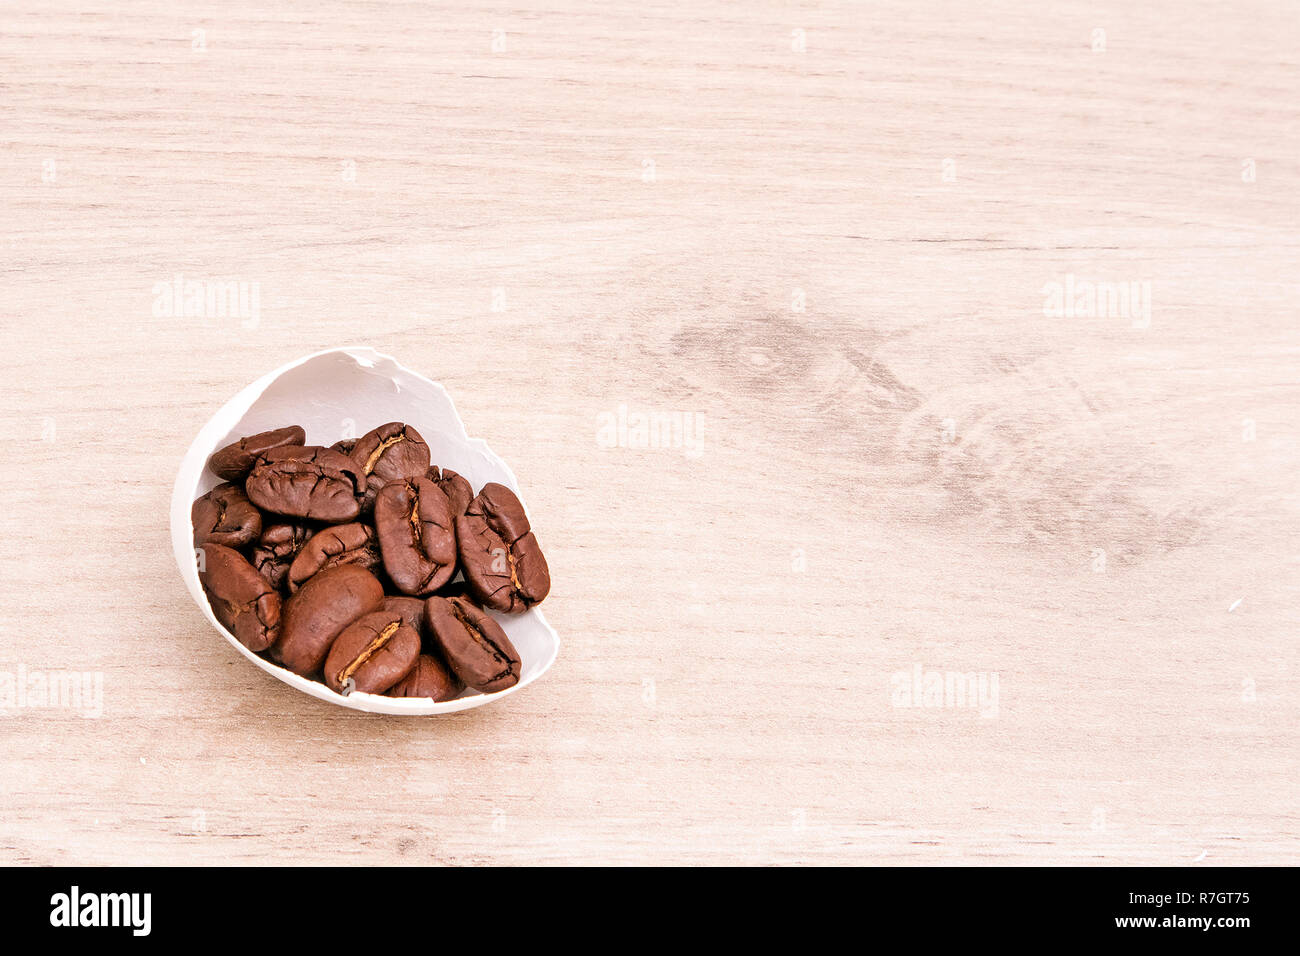 A half of white egg shell full of roasted coffee beans placed on a wooden surface Stock Photo